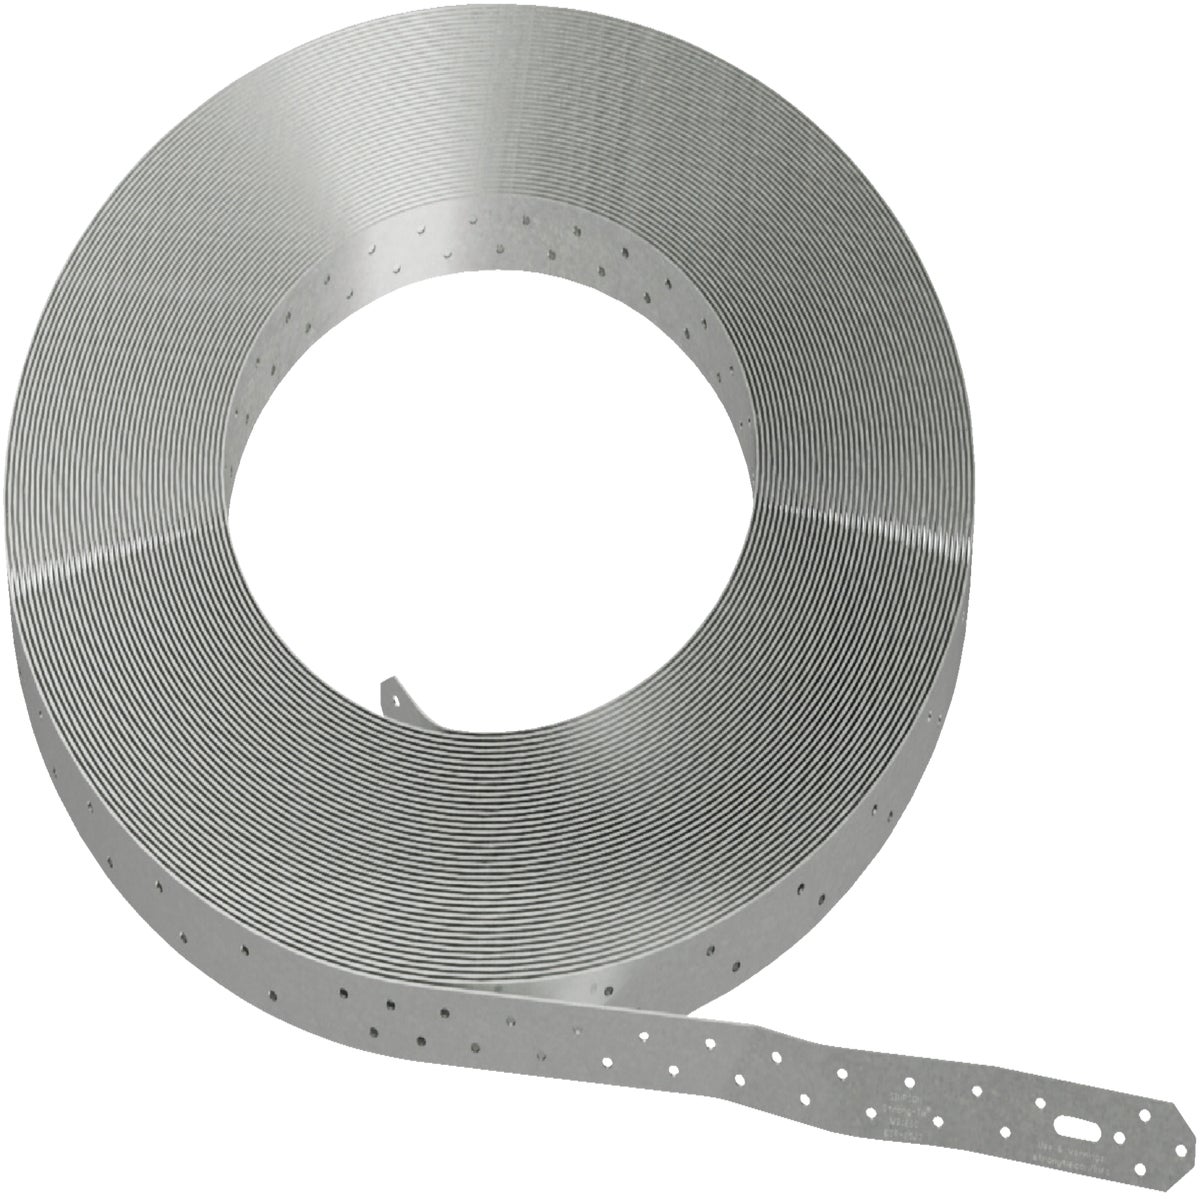 WB126C Simpson Strong-Tie Wall Bracing Coil Image